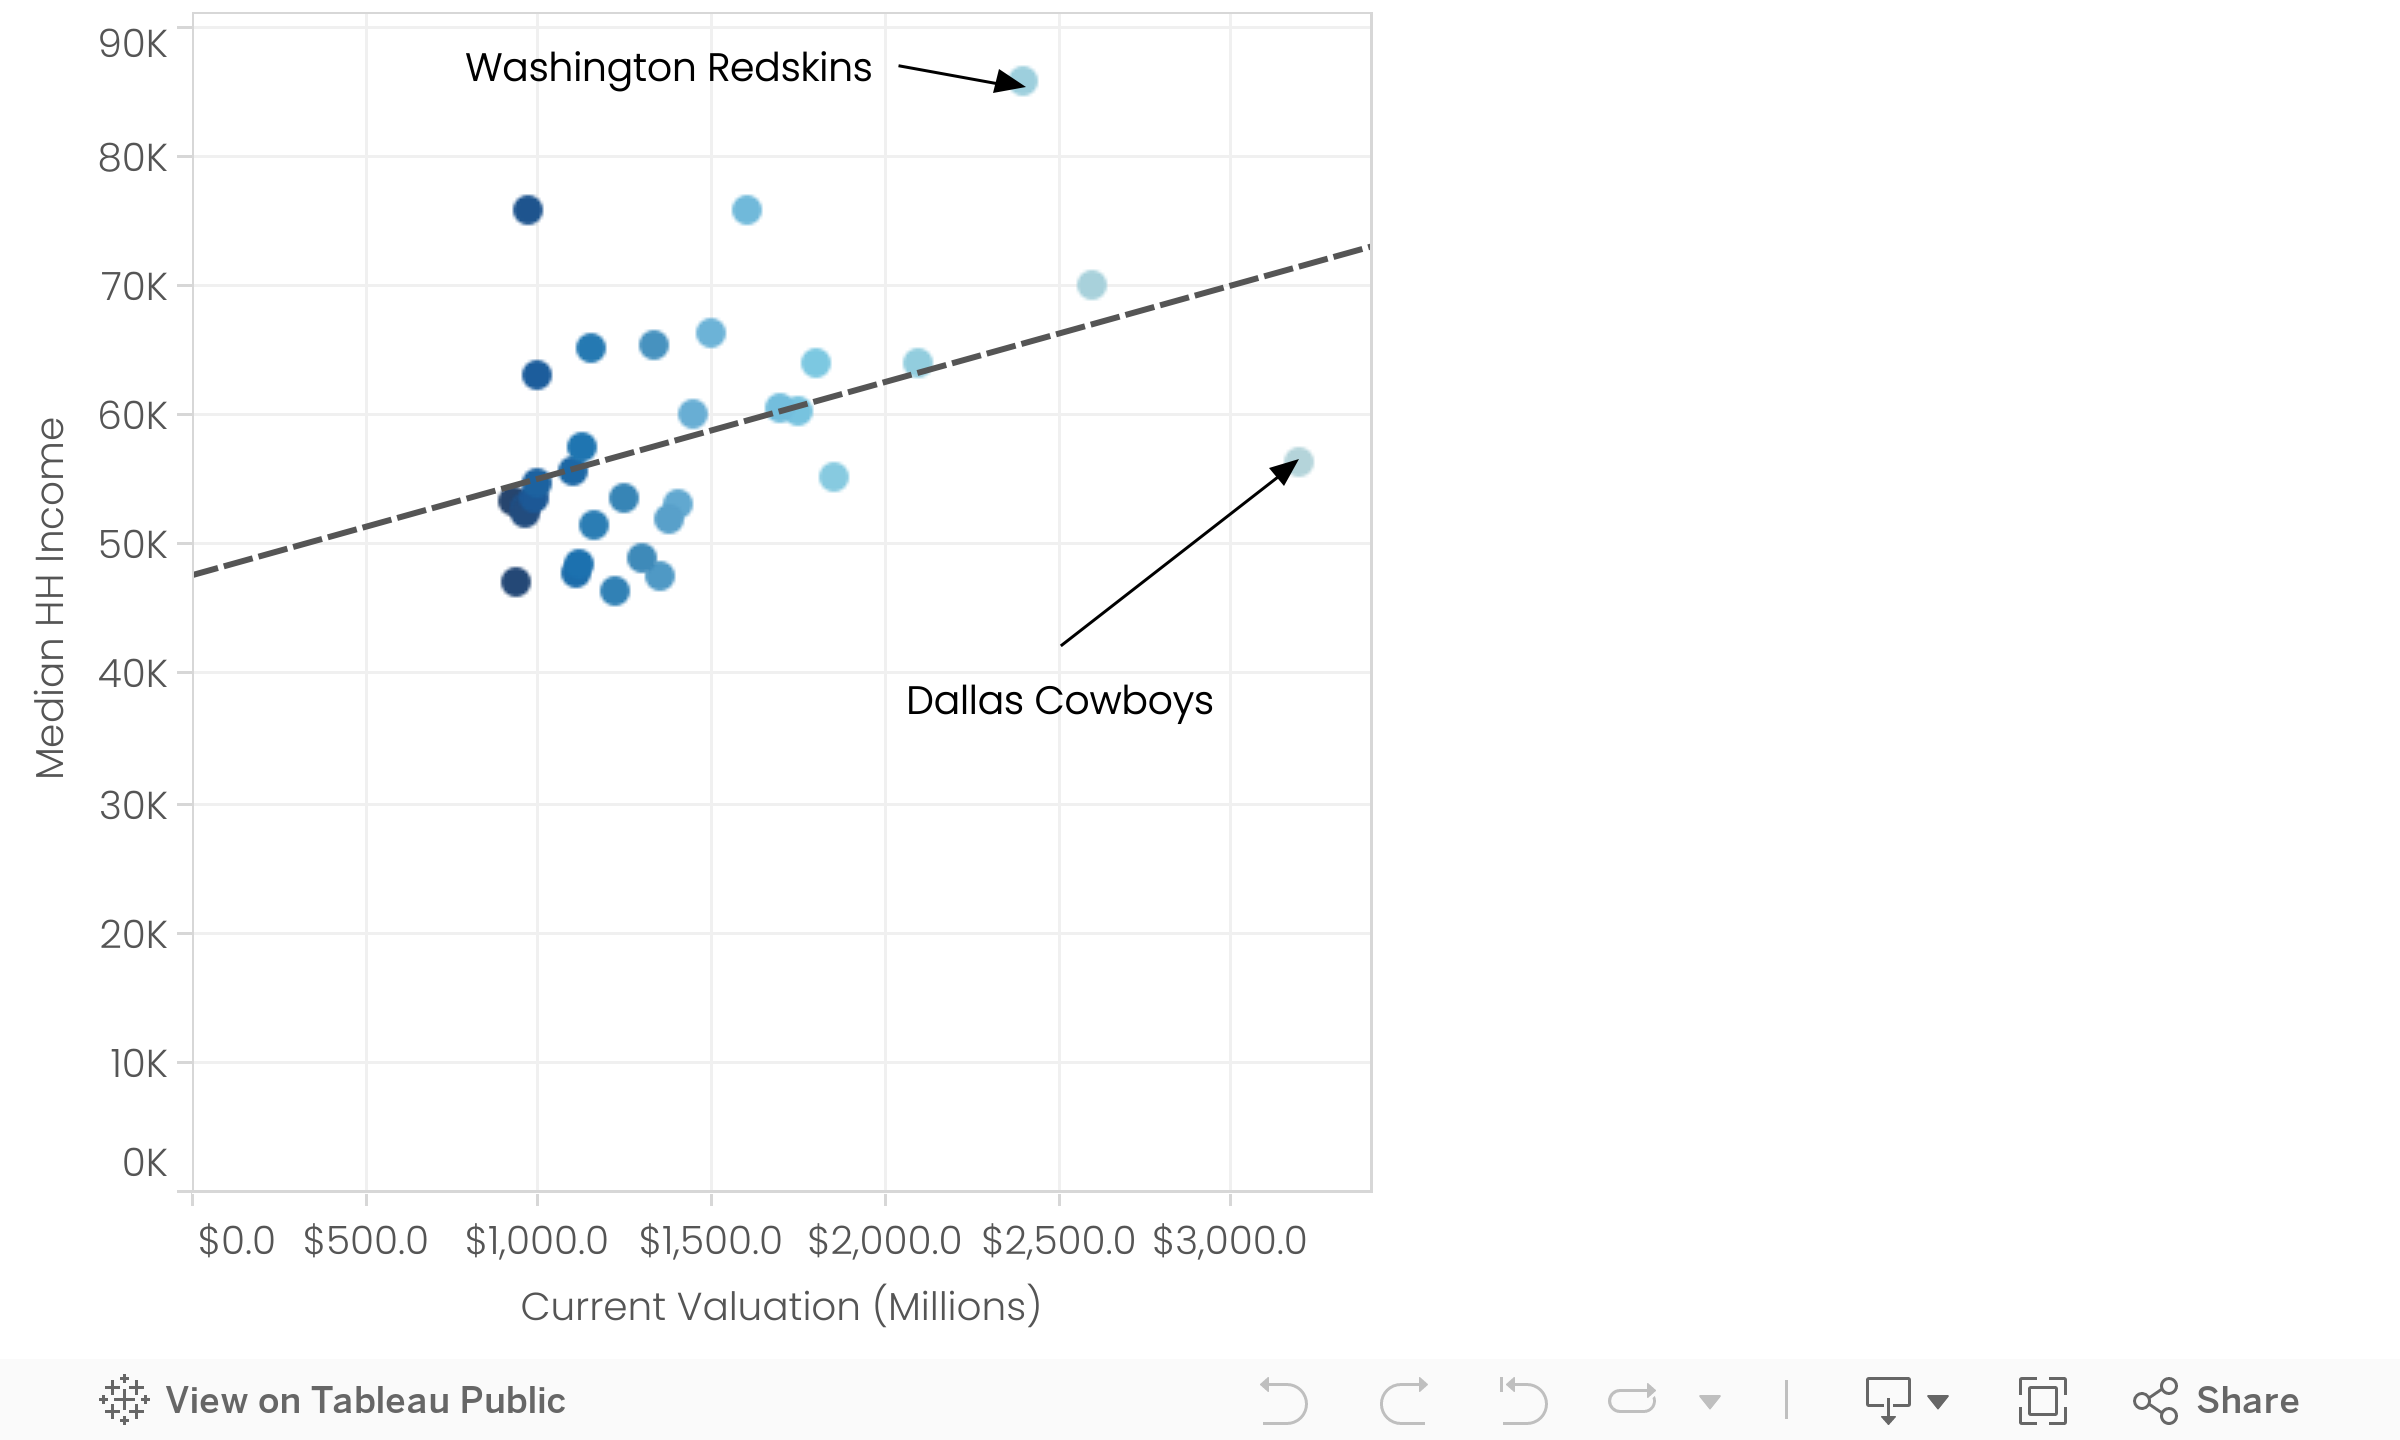 Median Household Income and Current Team Valuation (Sized by Playoff Appearances since 1999) 